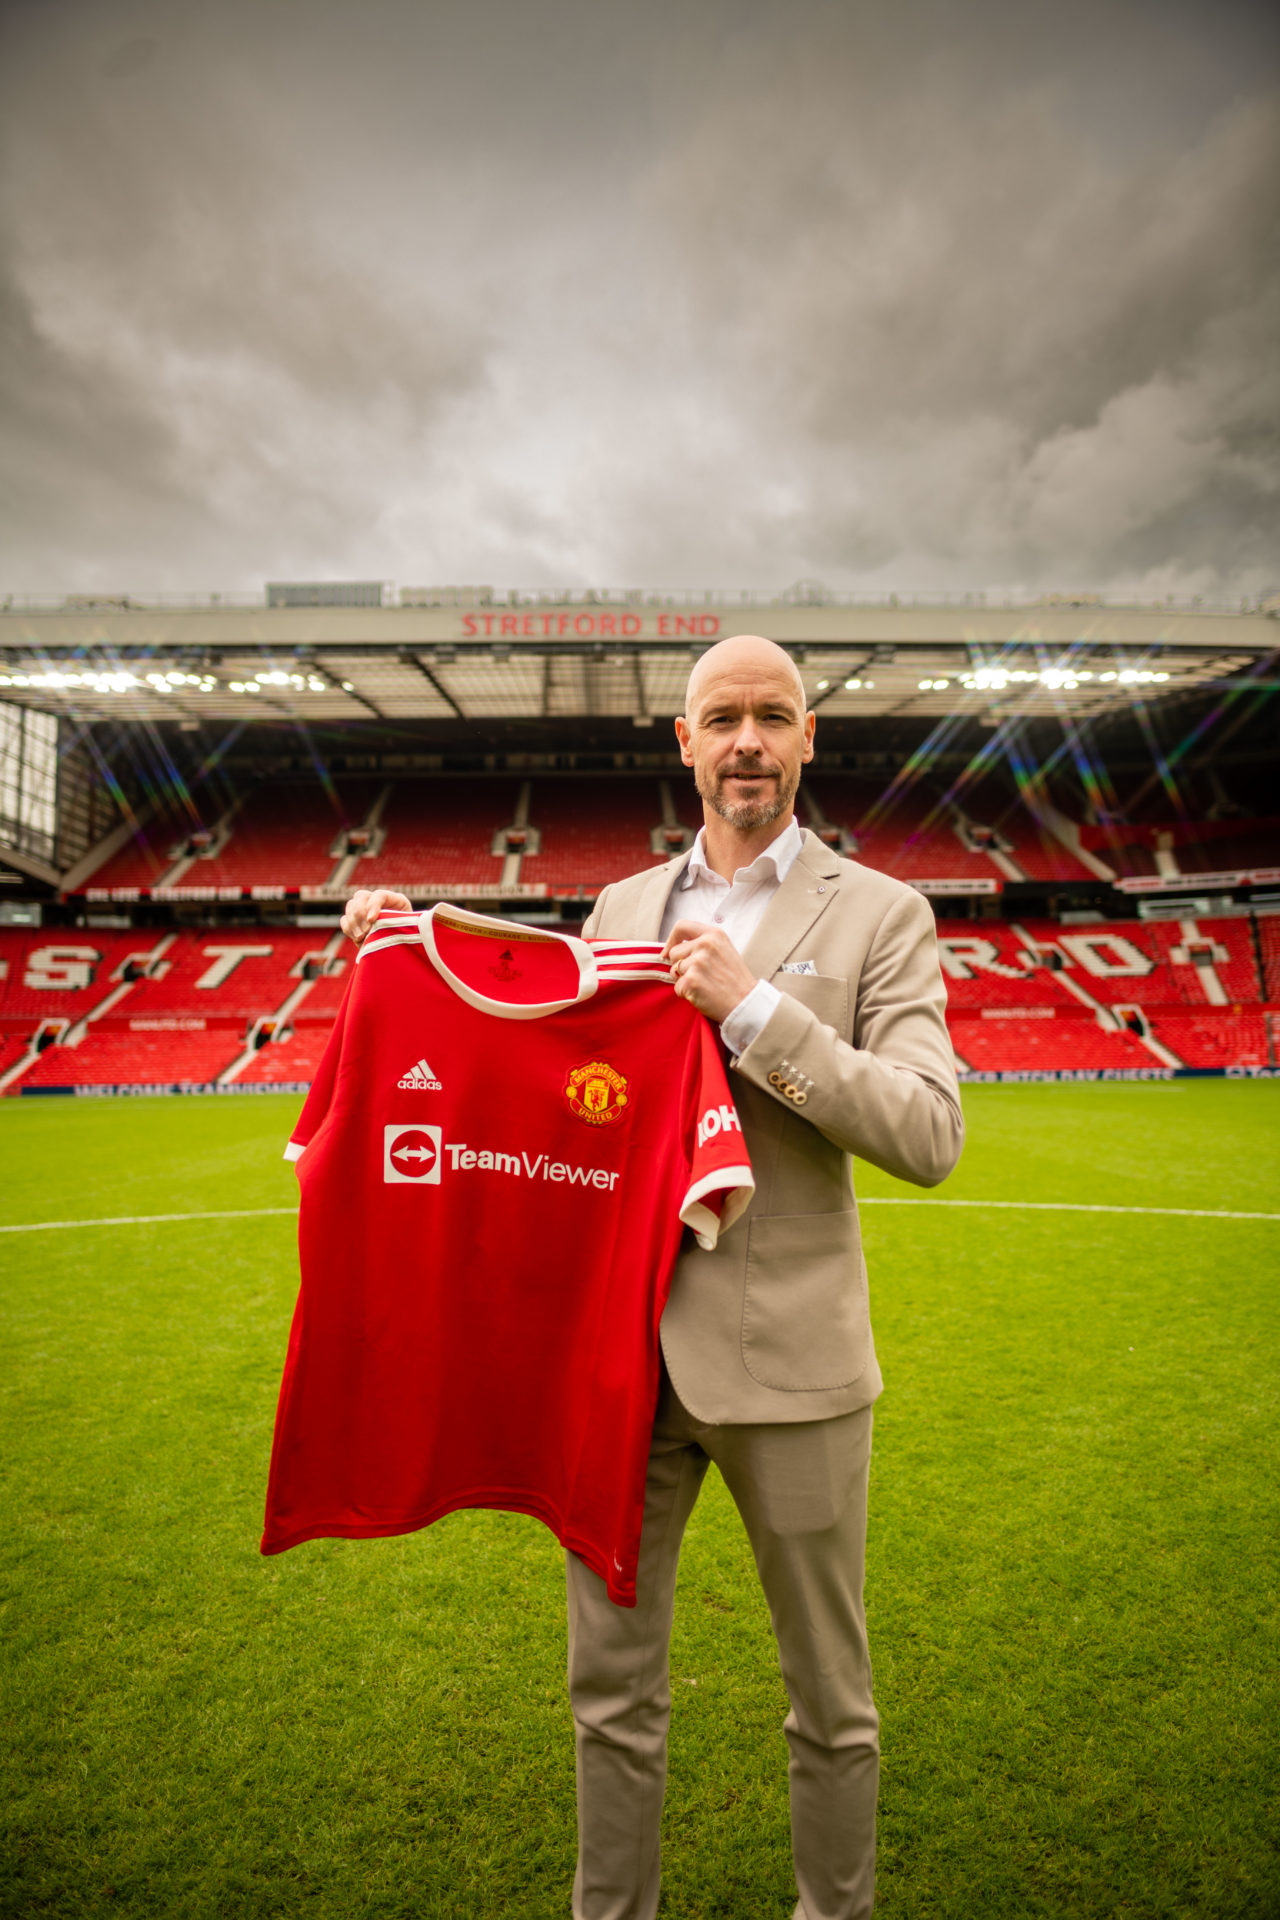 Erik ten Hag pictured at Old Trafford holding Manchester United shirt